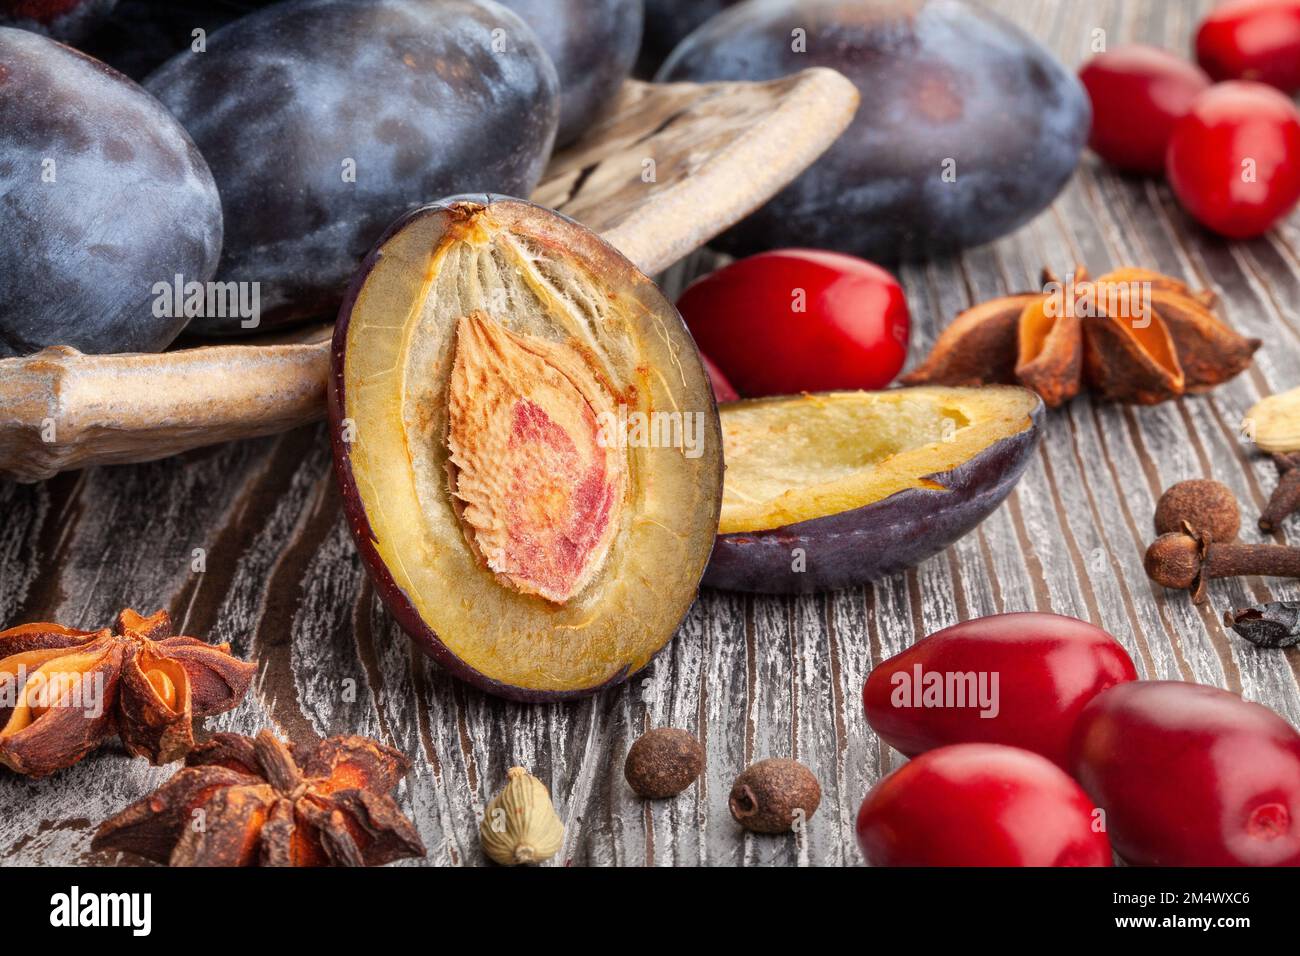 sliced prune plums on wood background Stock Photo